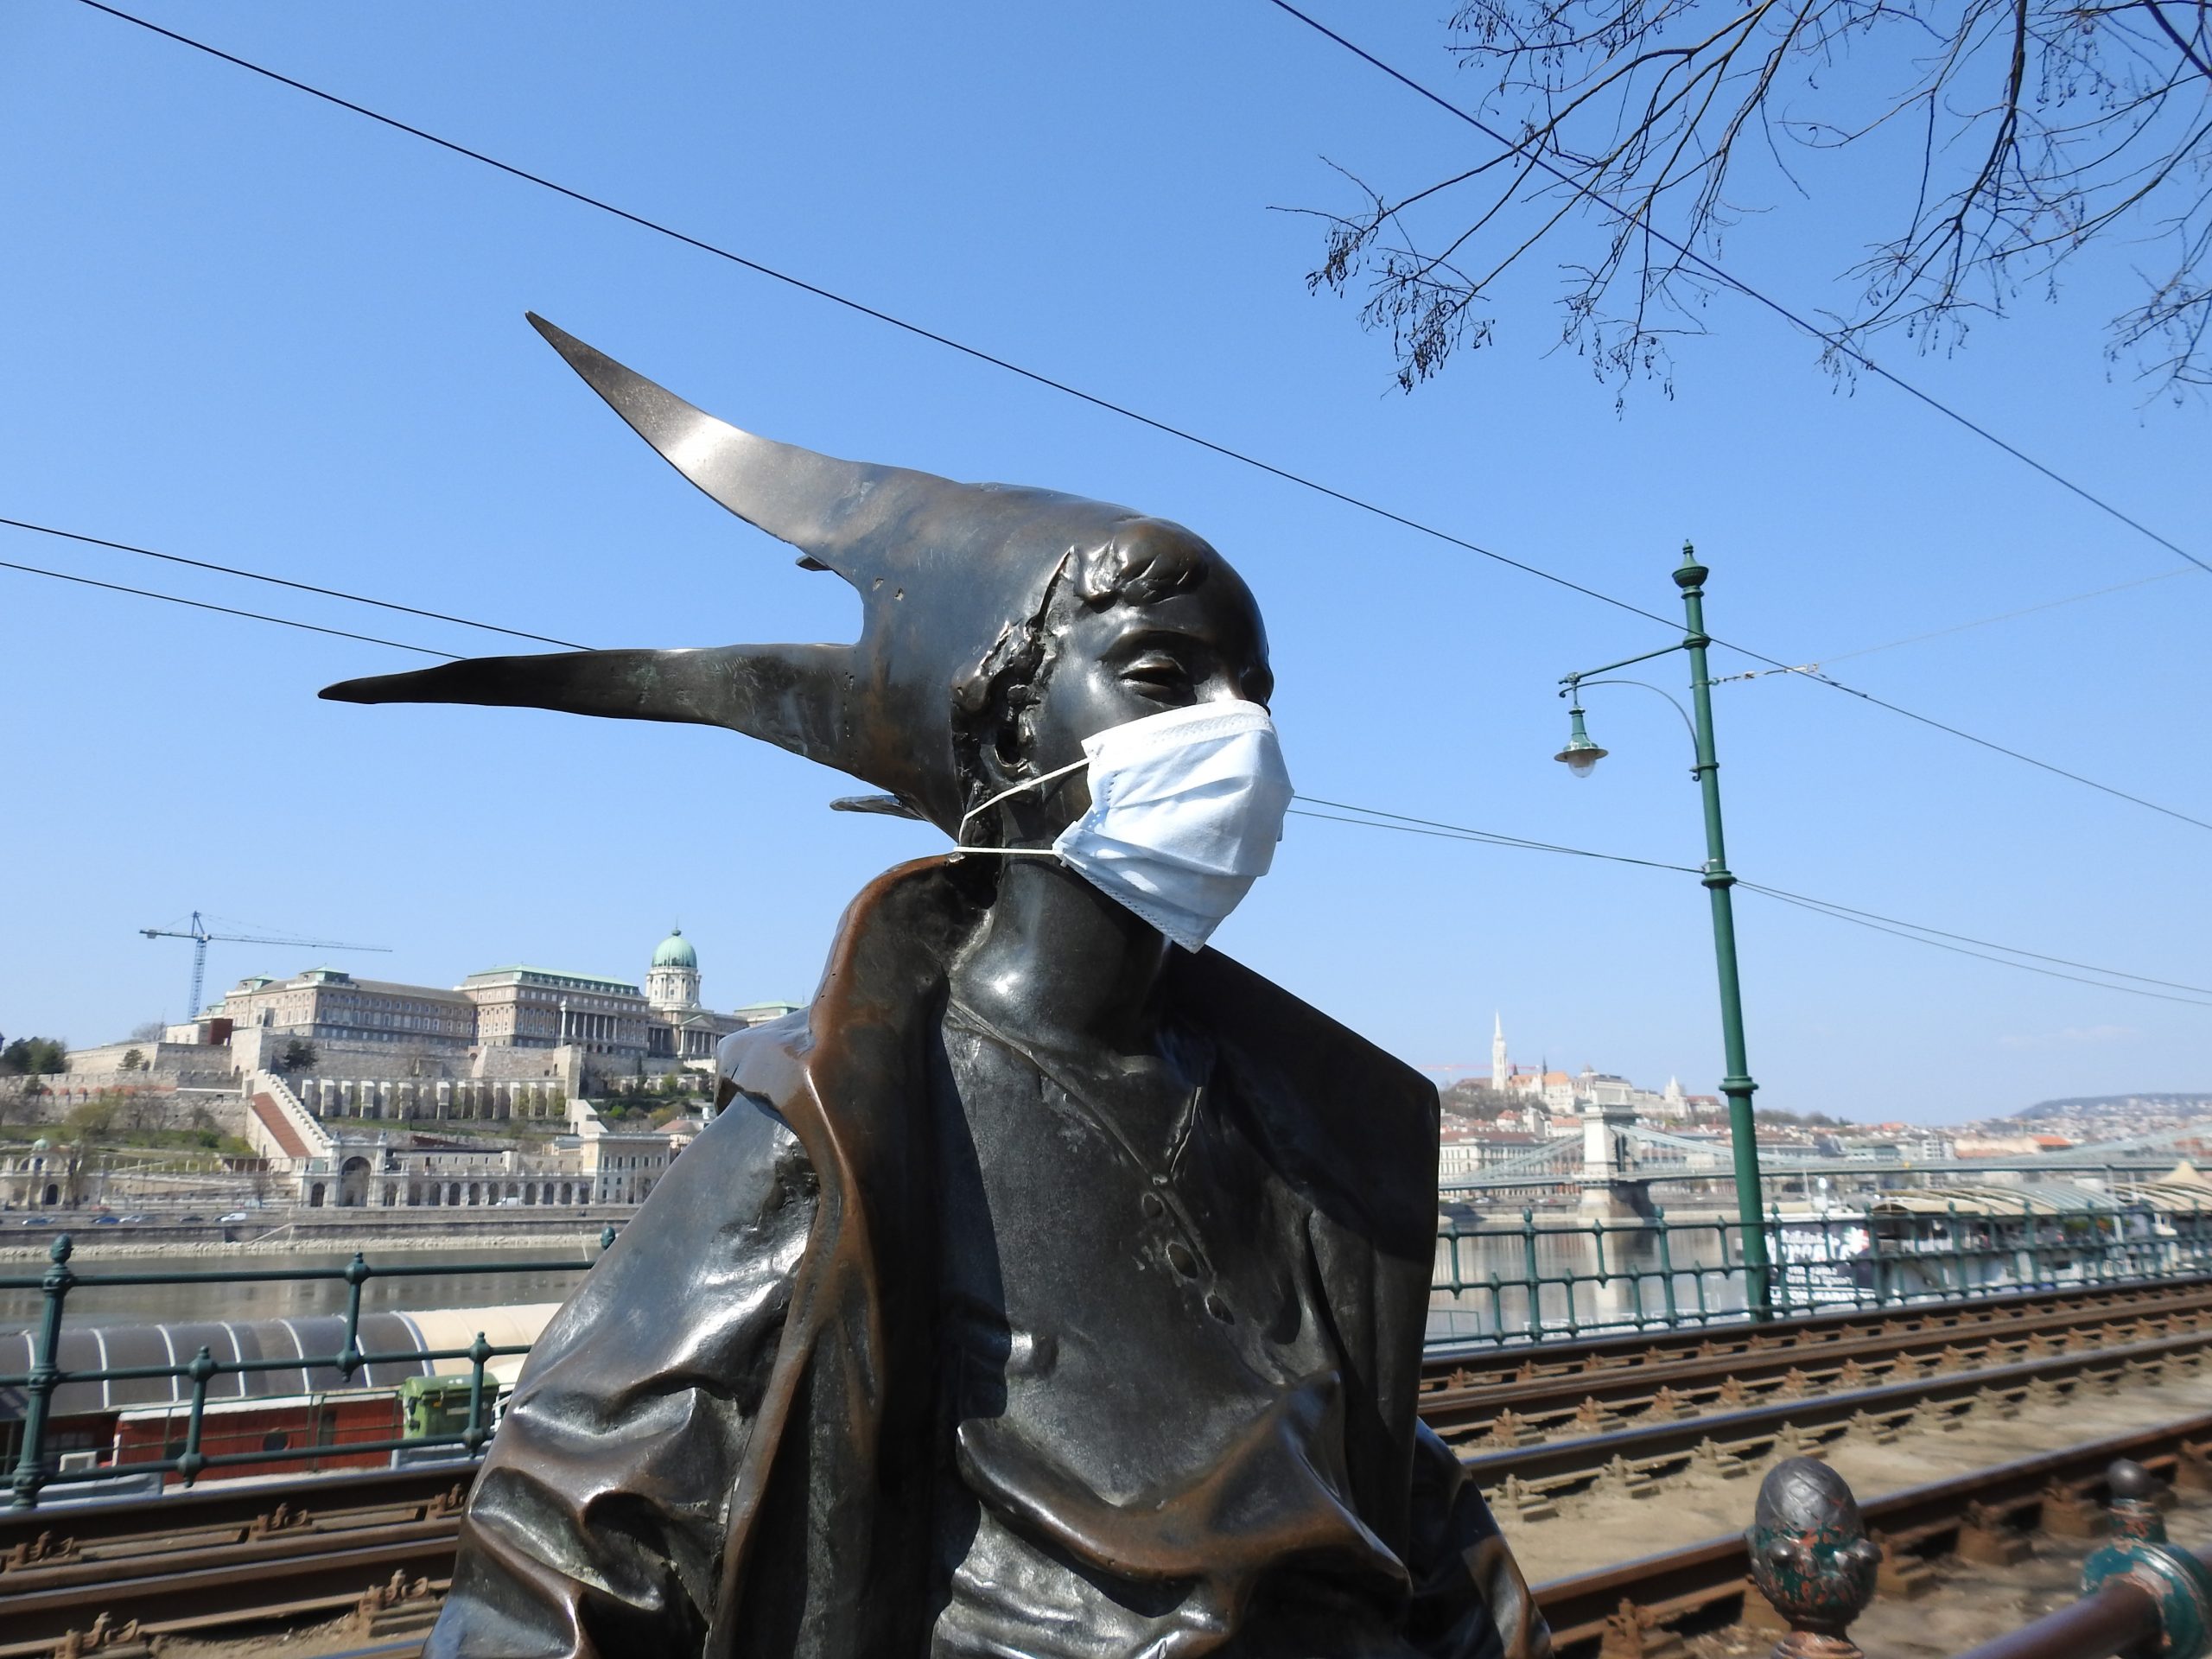 Close photo of the Little Princess statue wearing a mask during times of Covid-19 in Budapest